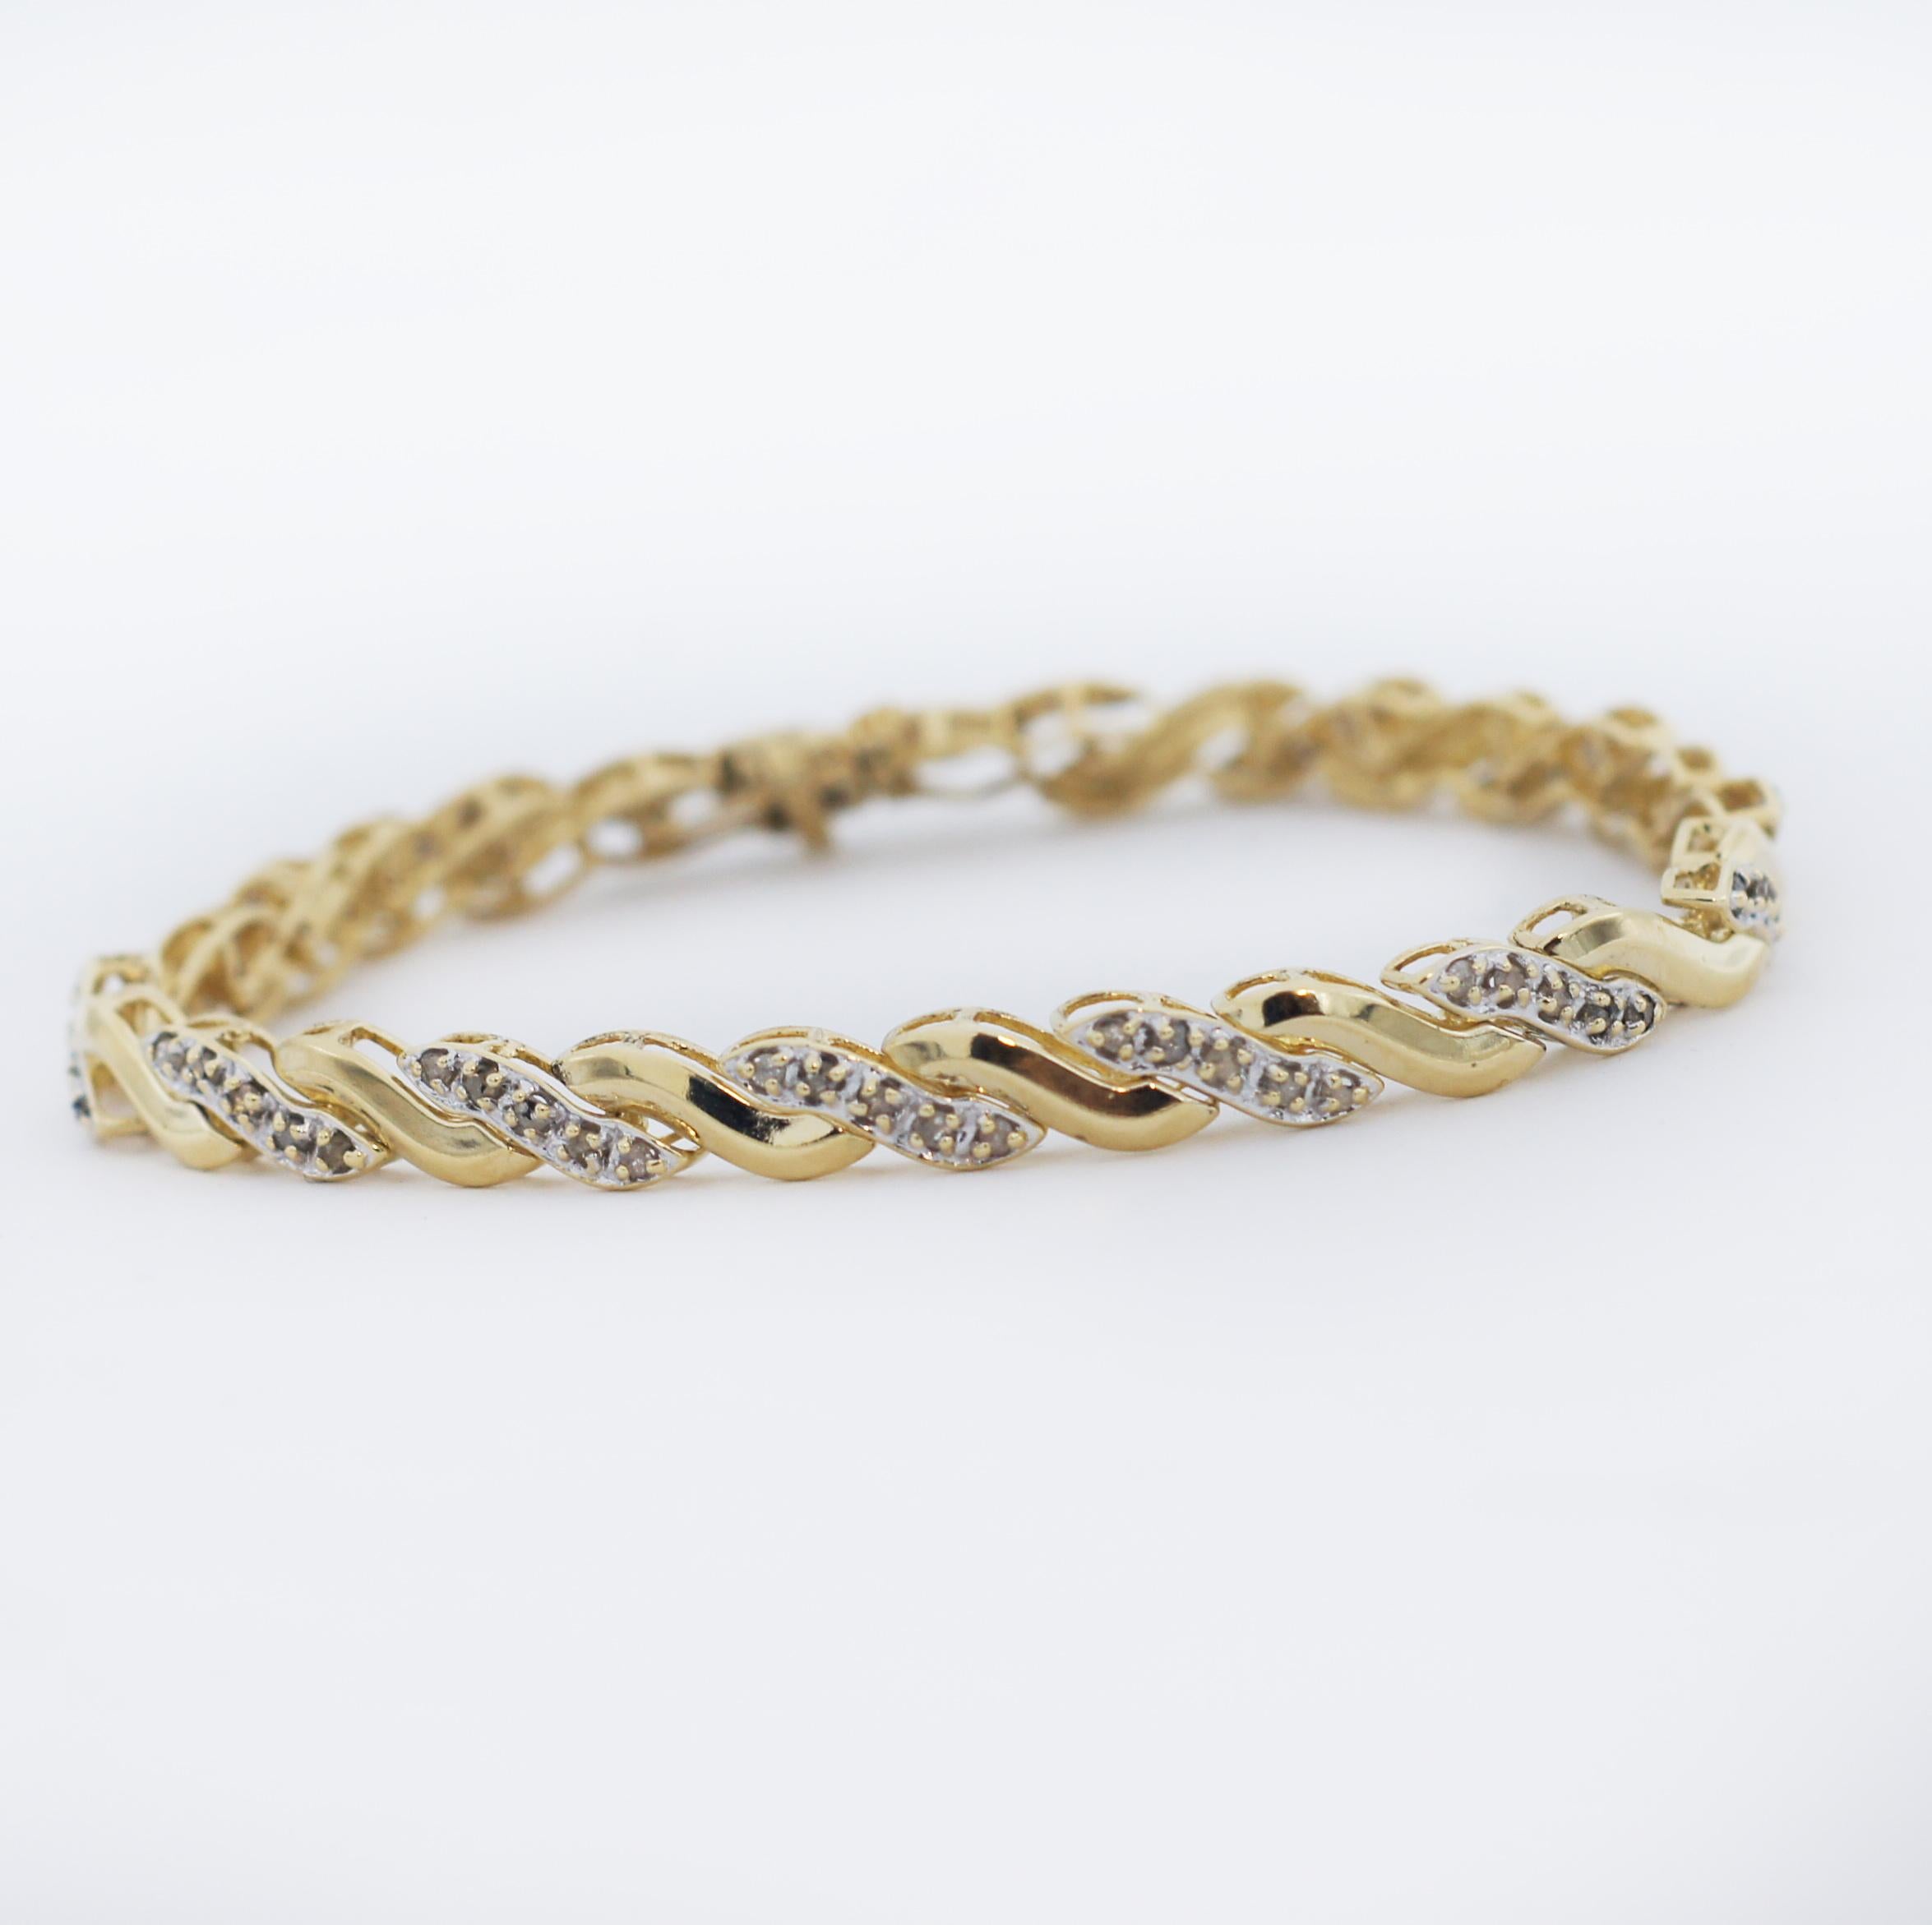 Beautiful wave shaped links
Some links are paved with diamonds
Made in 10K Yellow Gold
Total bracelet weight of 9.2 grams
Approx. 1/2 carats in Diamonds
Bracelet 7